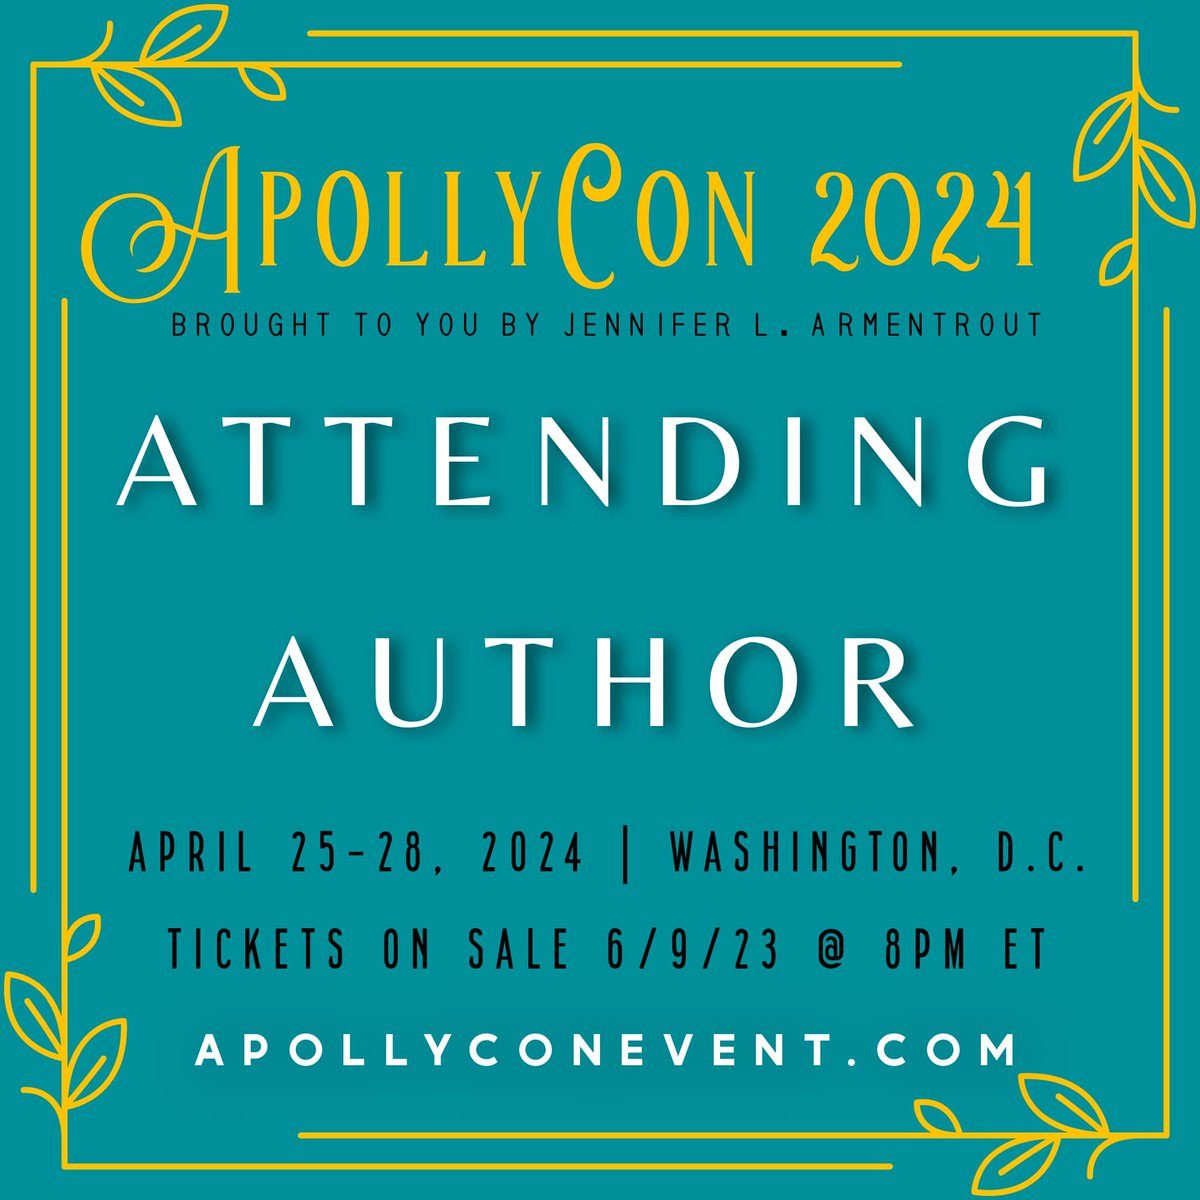 I'm so pleased to announce that I will be one of the many authors at @ApollyCon 2024. Woot! 
Tickets will go on sale June 9. For more info, visit the event website: jenniferlarmentrout.com/apollycon/
Hope to see you there! 😎
#ApollyCon #ApollyCon2024 #authors #conventions #books